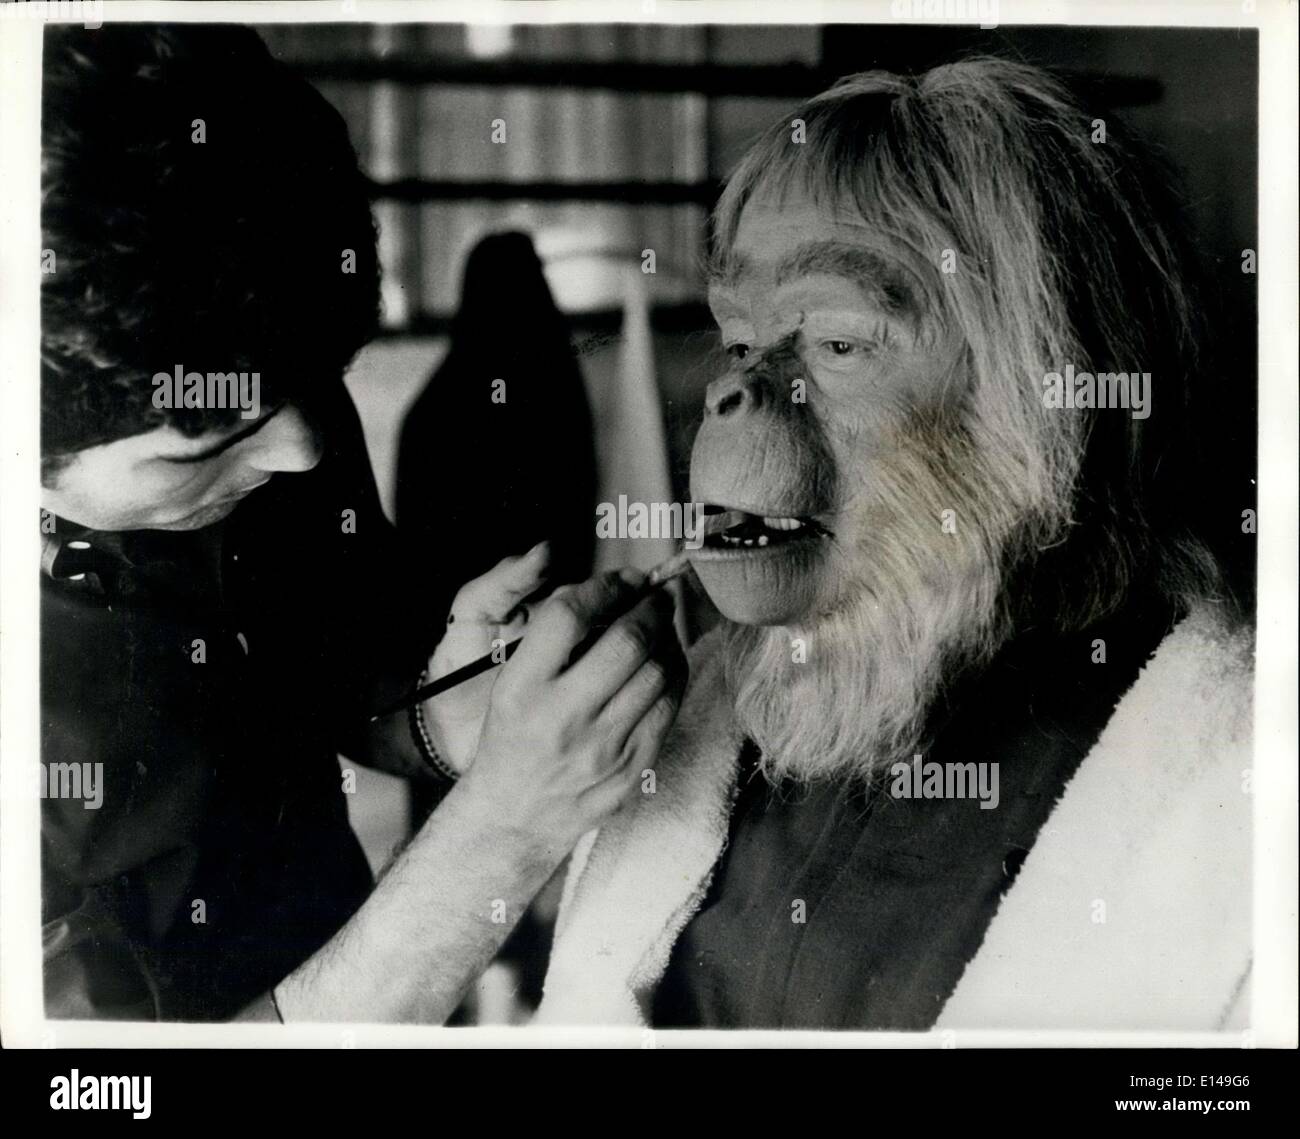 Apr. 17, 2012 - Most Challenging Makeup Operation In History: The biggest and most challenging makeup operation in the history of Hollywood is currently underway for a new film called ''Planet of the Apes''. One hundred artists and laboratory men have been given the job of turning out a cast of ape-like beings who inhabit another planet. Faces of the apes are especially difficult to make since they must be pliable and able to express emotion. Experiments have been going on for a year to be ready for the commencement of the -million production Stock Photo